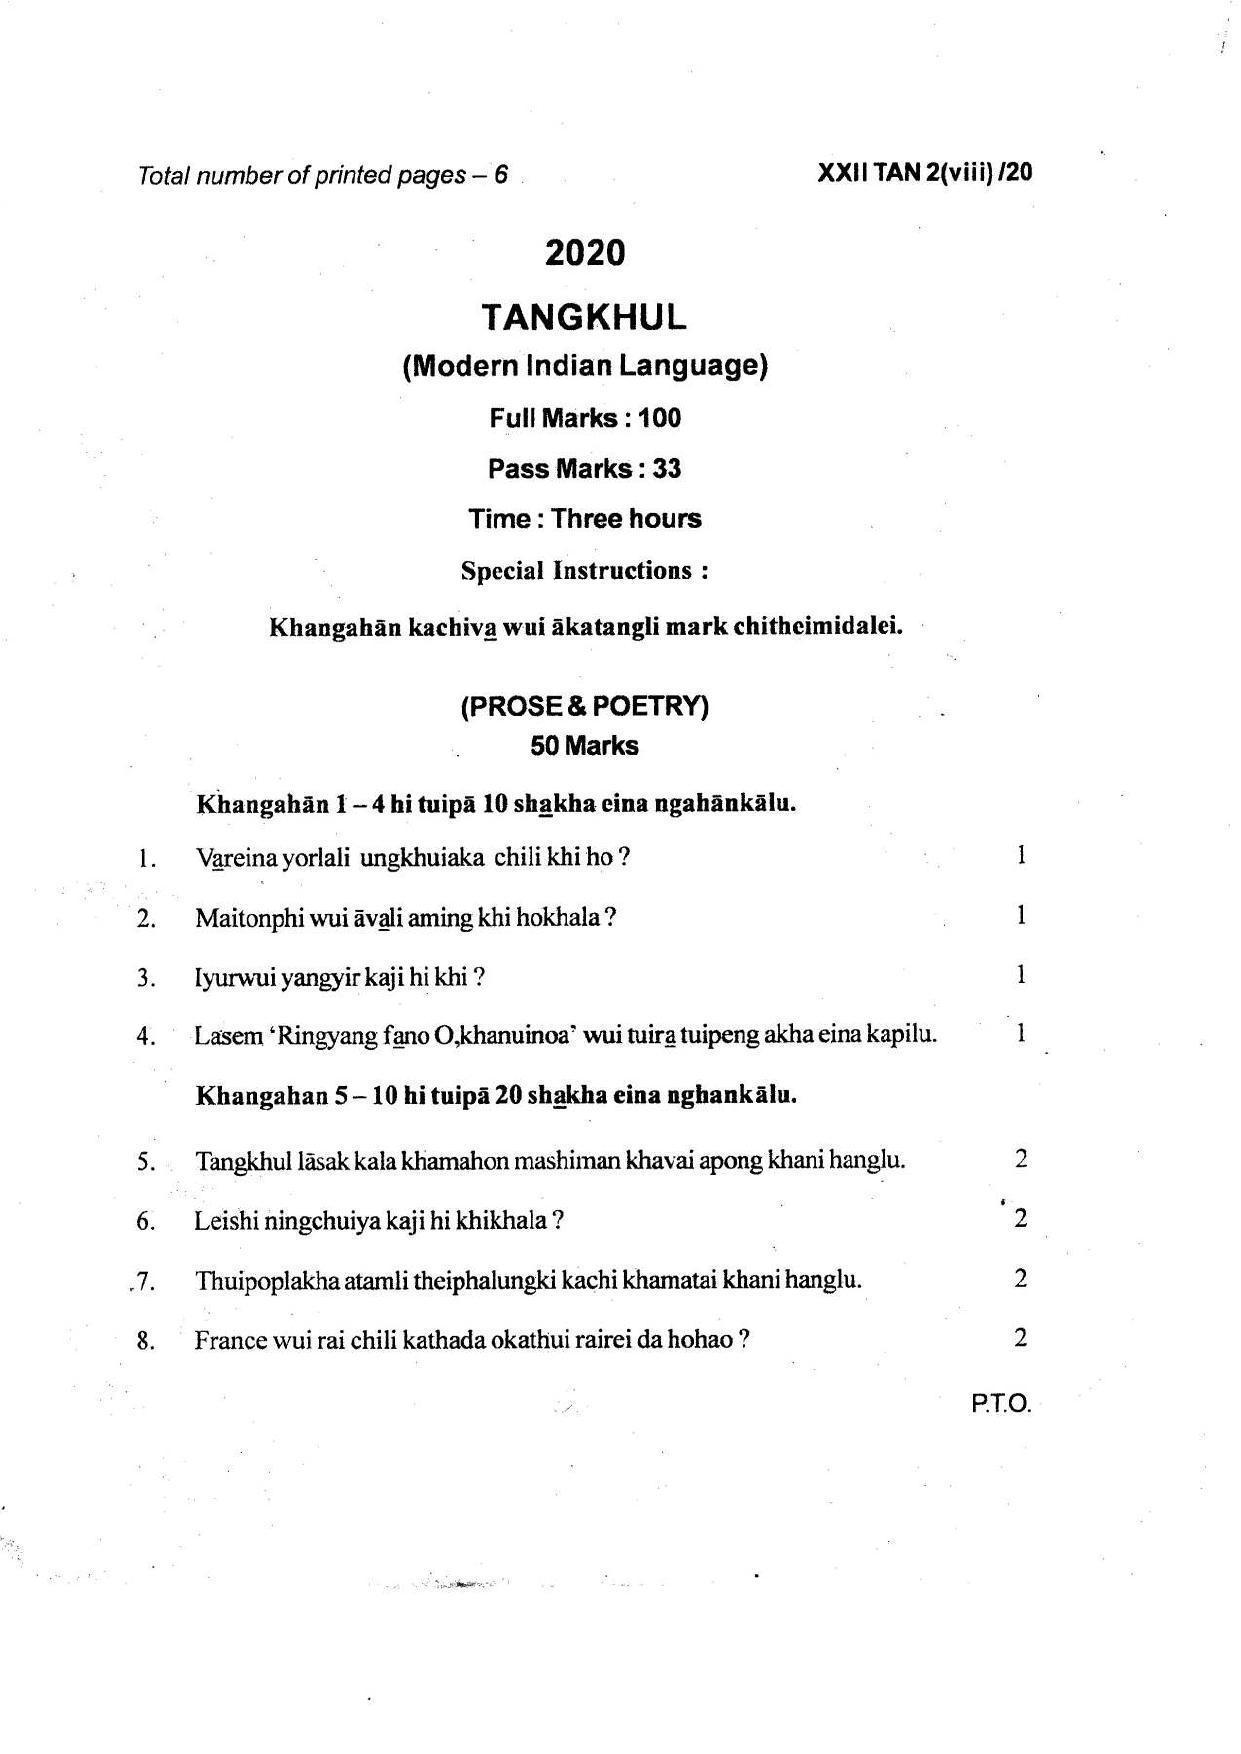 COHSEM Class 12 Tangkhul Question Papers 2020 - Page 1